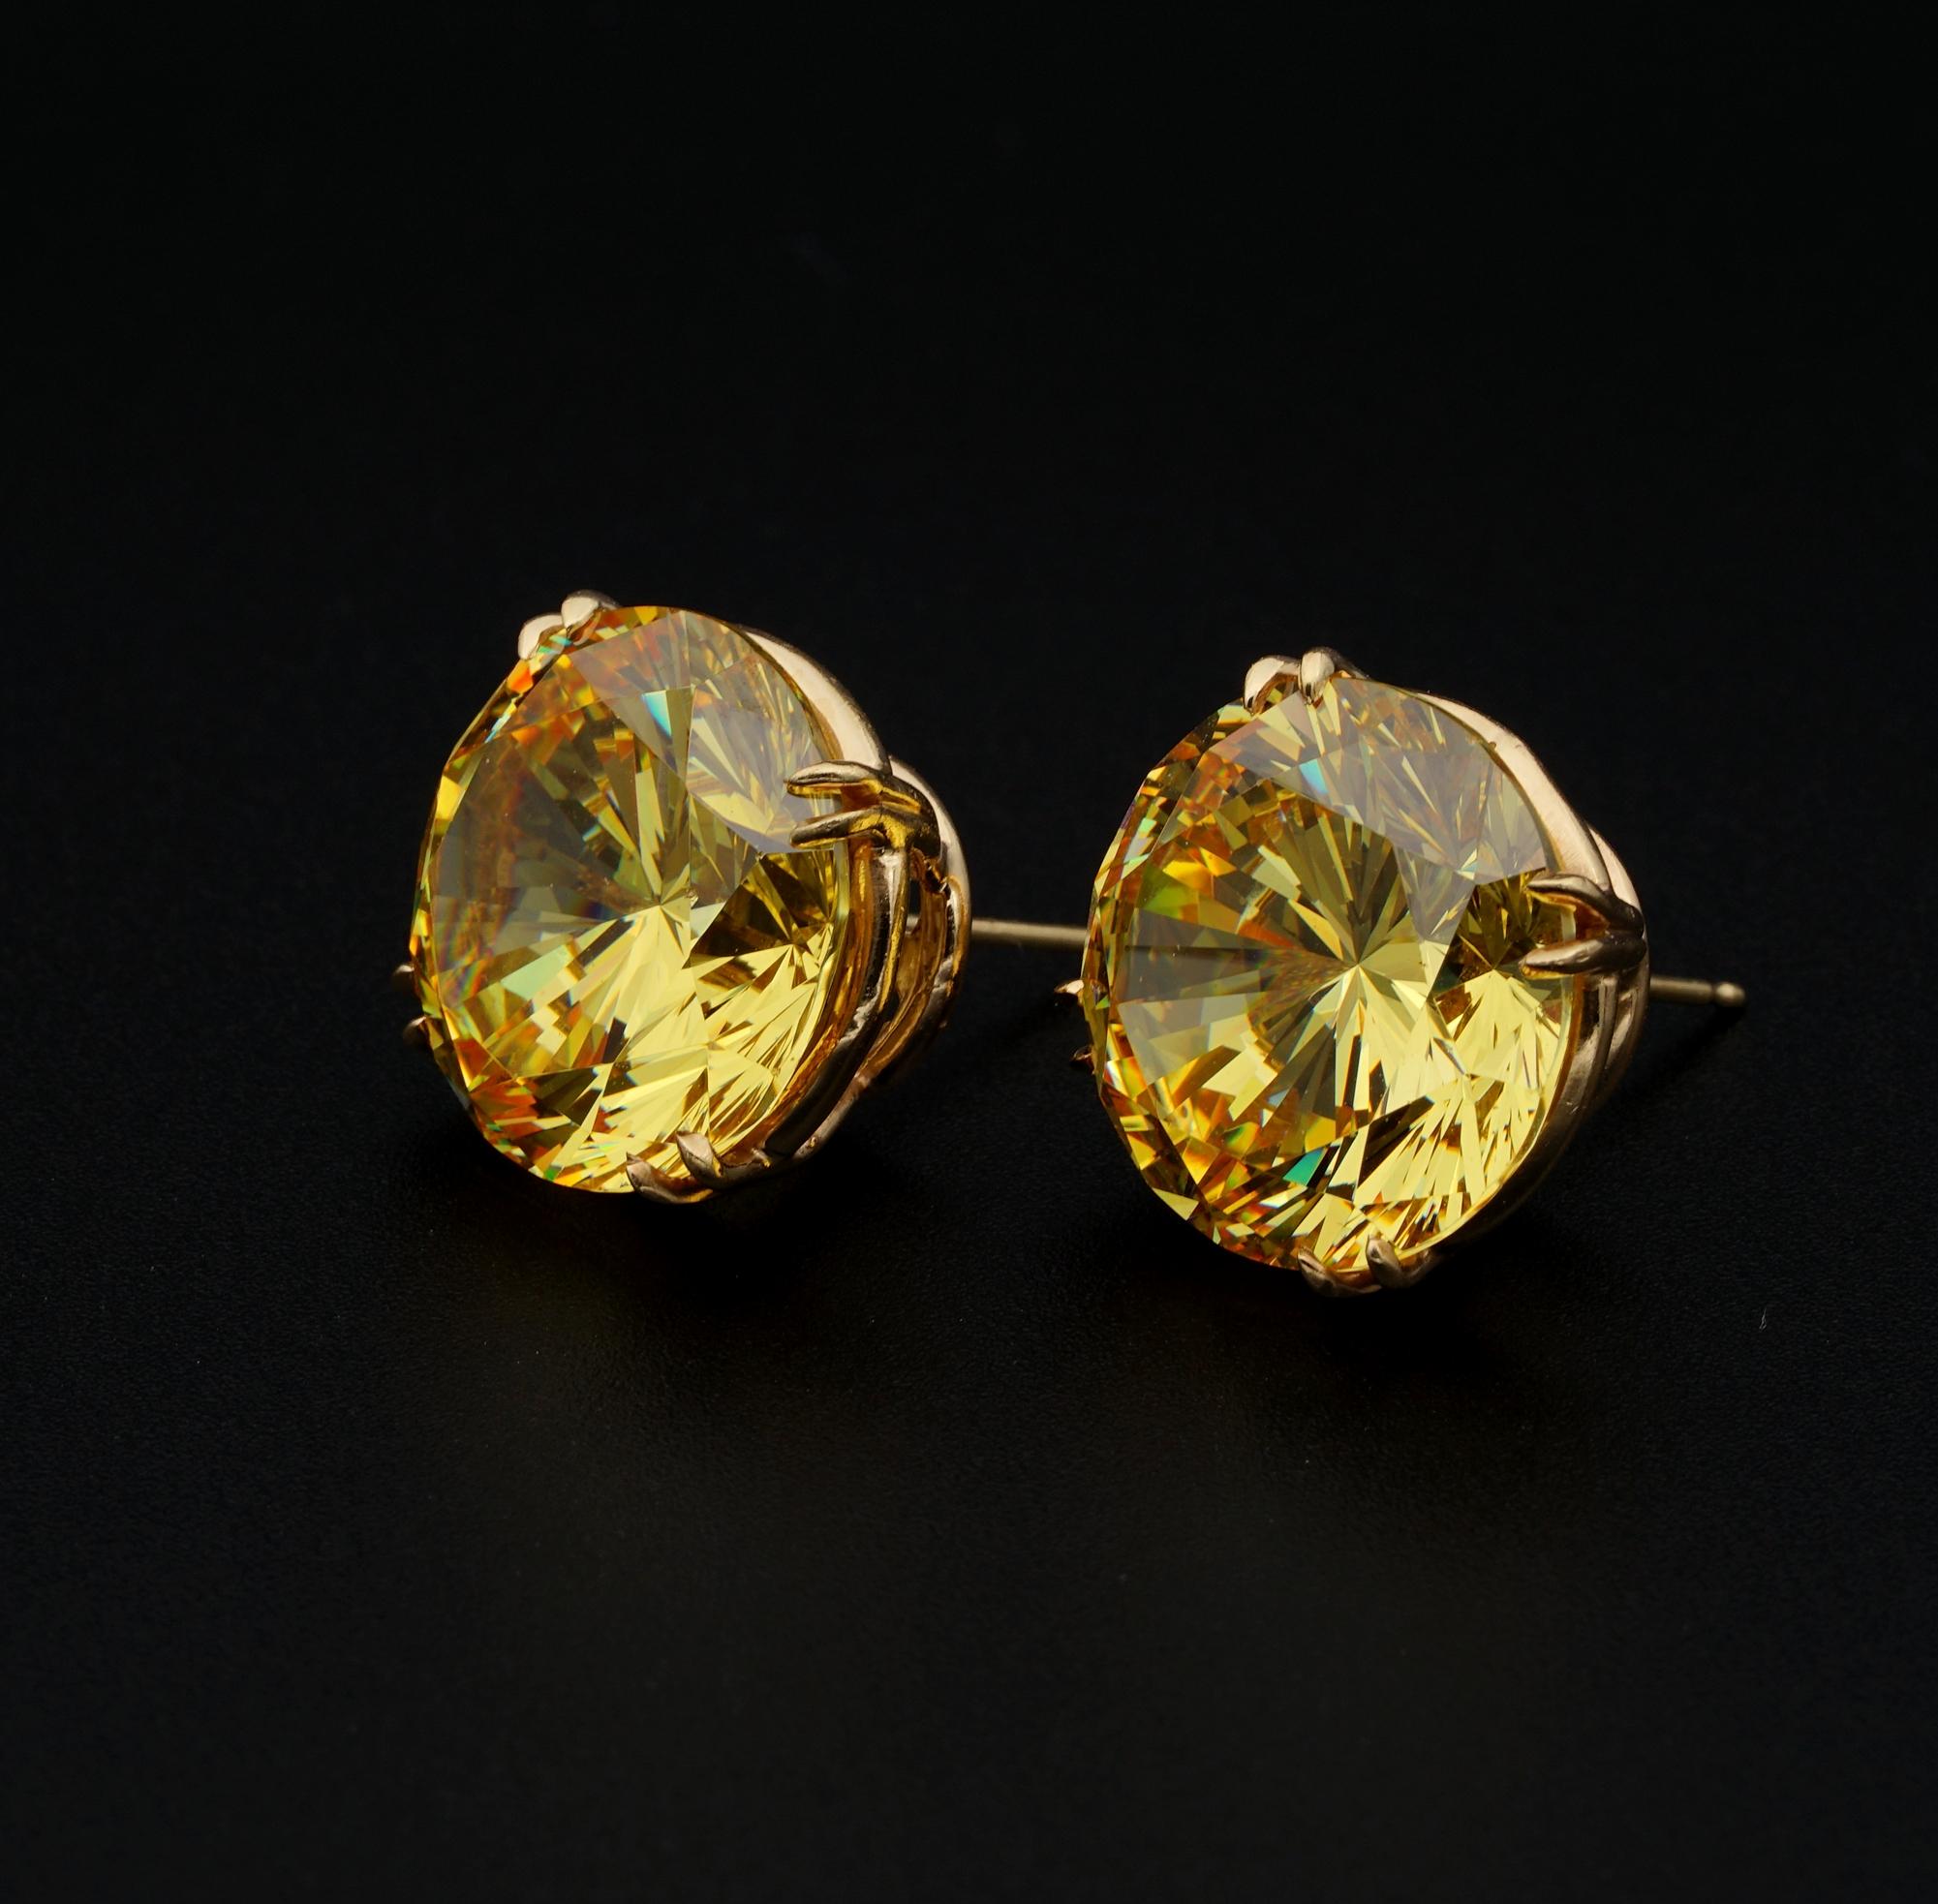 Exceptional Pair 41.60 Carat of Rare Mali Garnet Stud Earrings For Sale 1